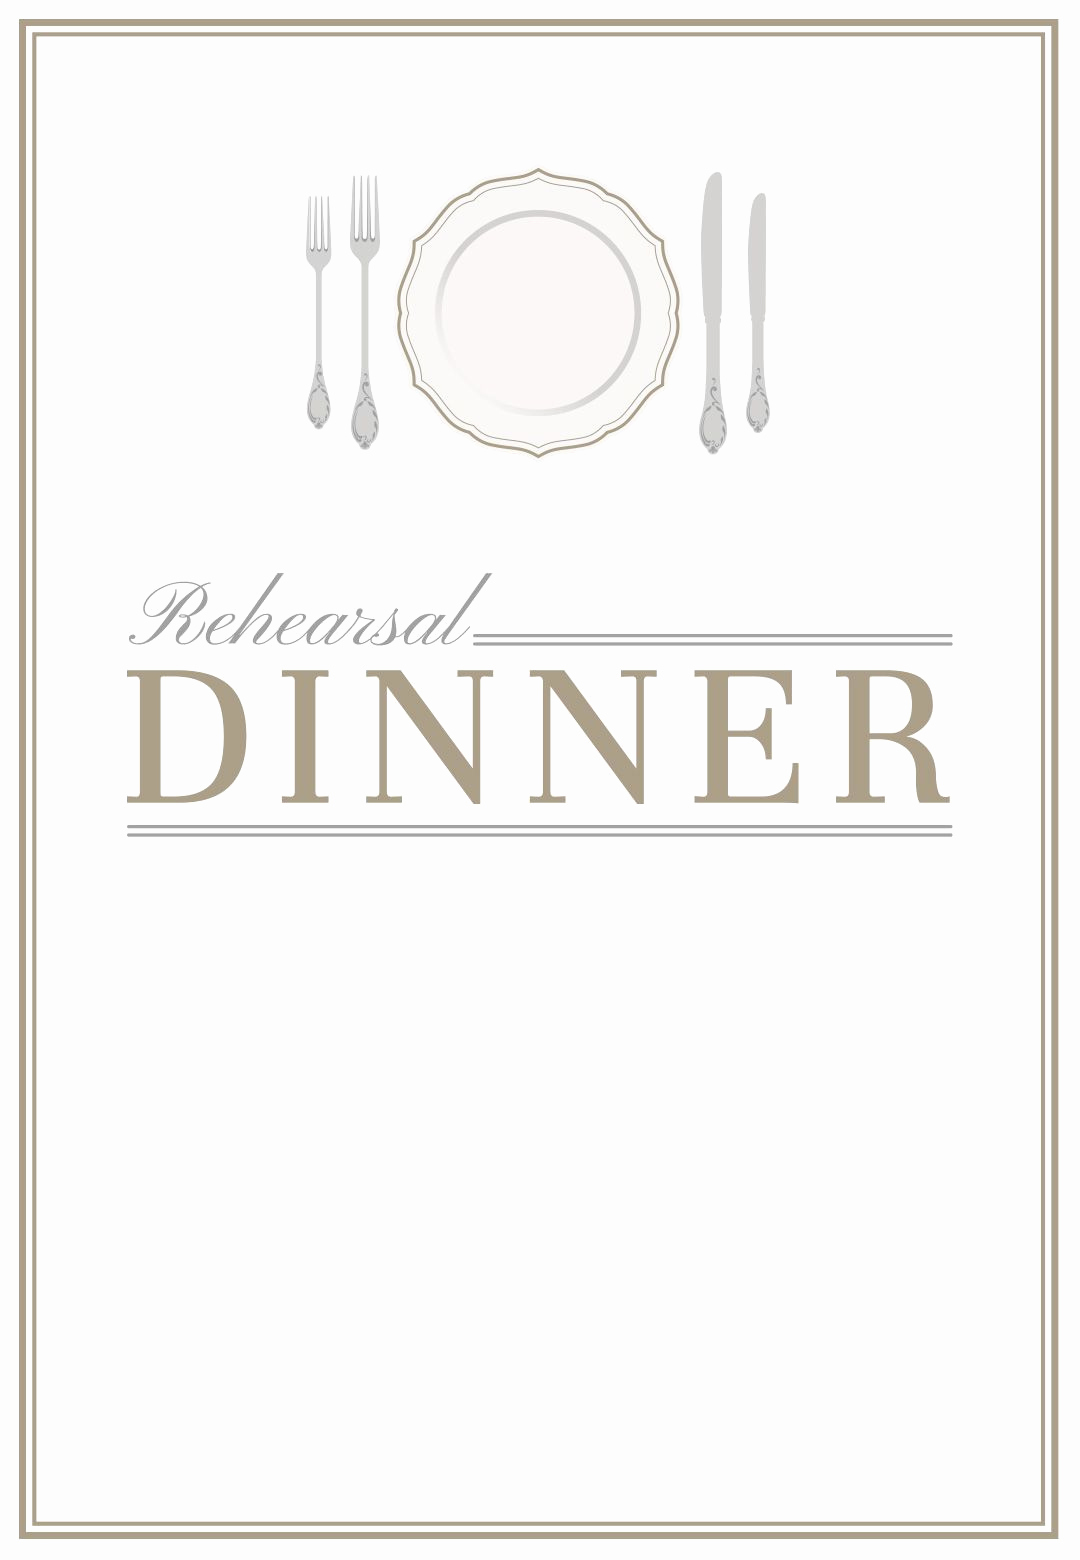 Business Dinner Invitation Template New Dinner Plate Template &amp; Download Plate with Blue Patterned